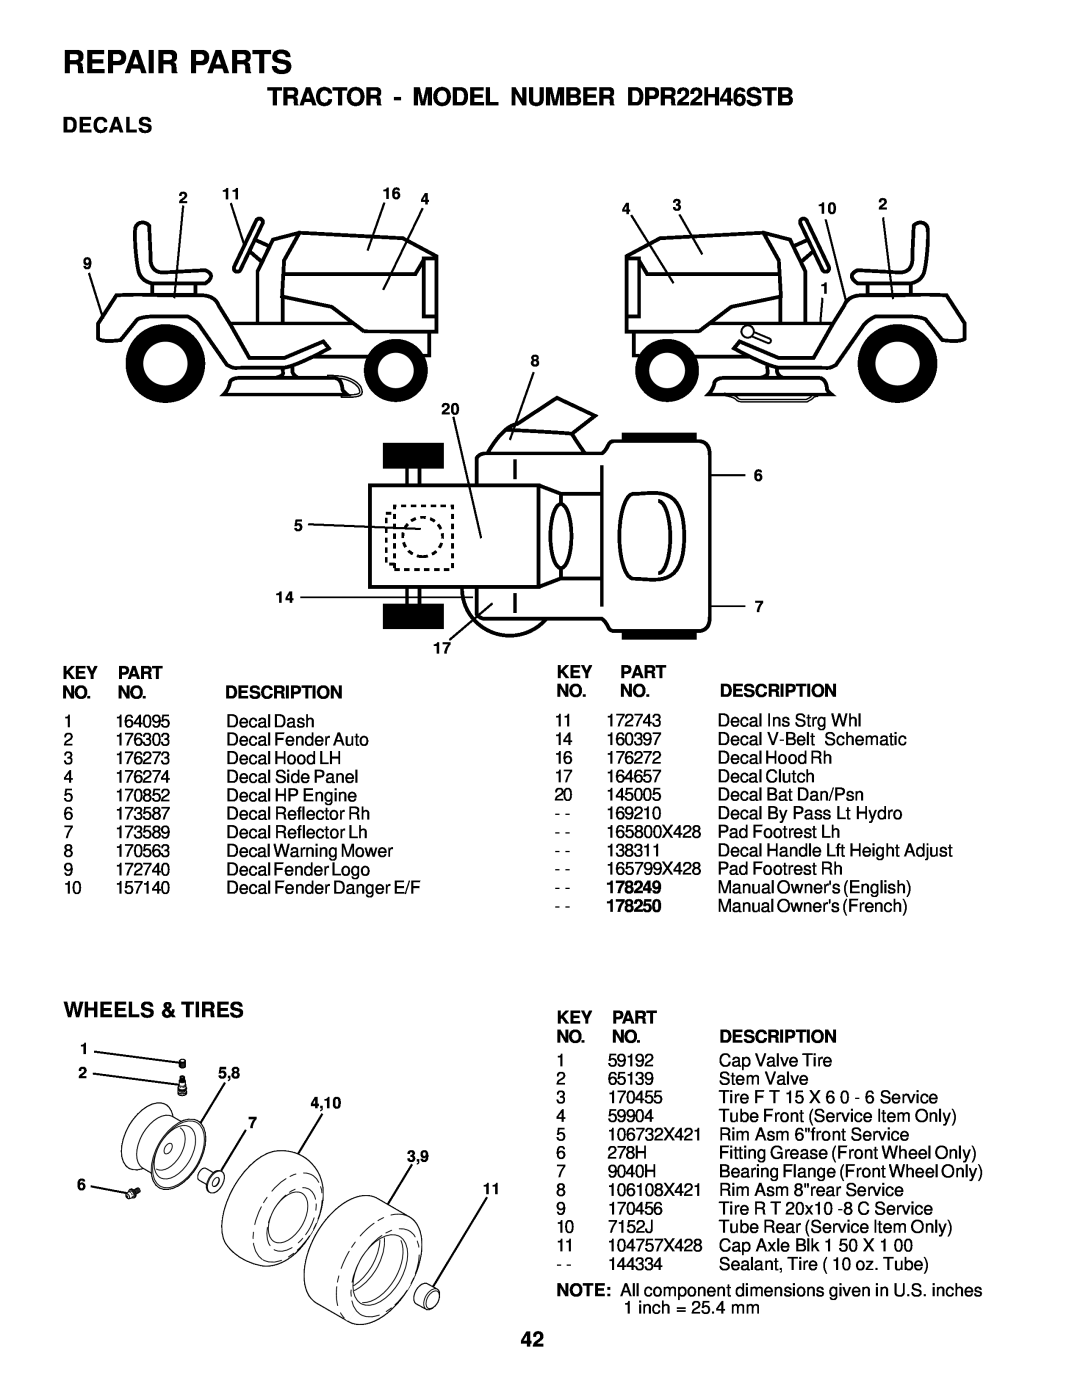 Poulan owner manual Decals, Wheels & Tires, Repair Parts, TRACTOR - MODEL NUMBER DPR22H46STB, 25,8 4,10 